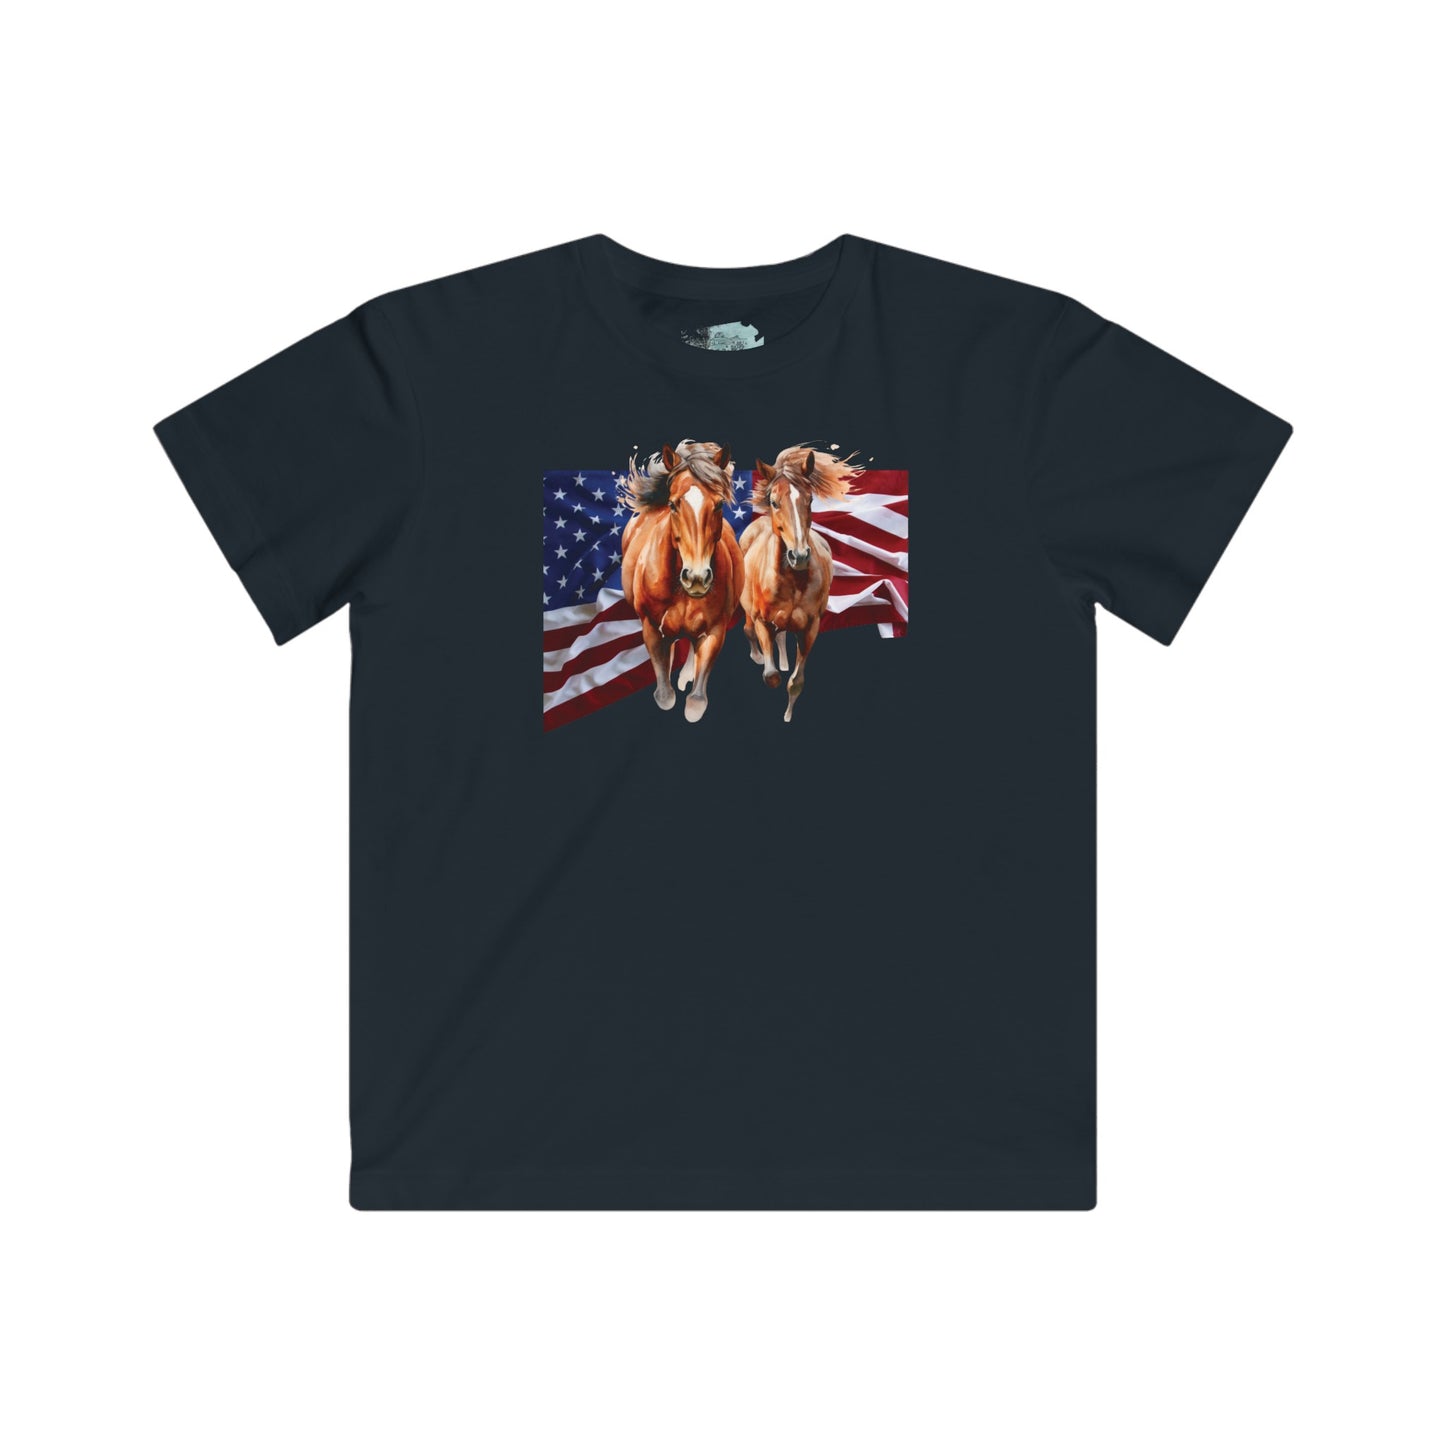 Horses of the Flag Kids Jersey Tee